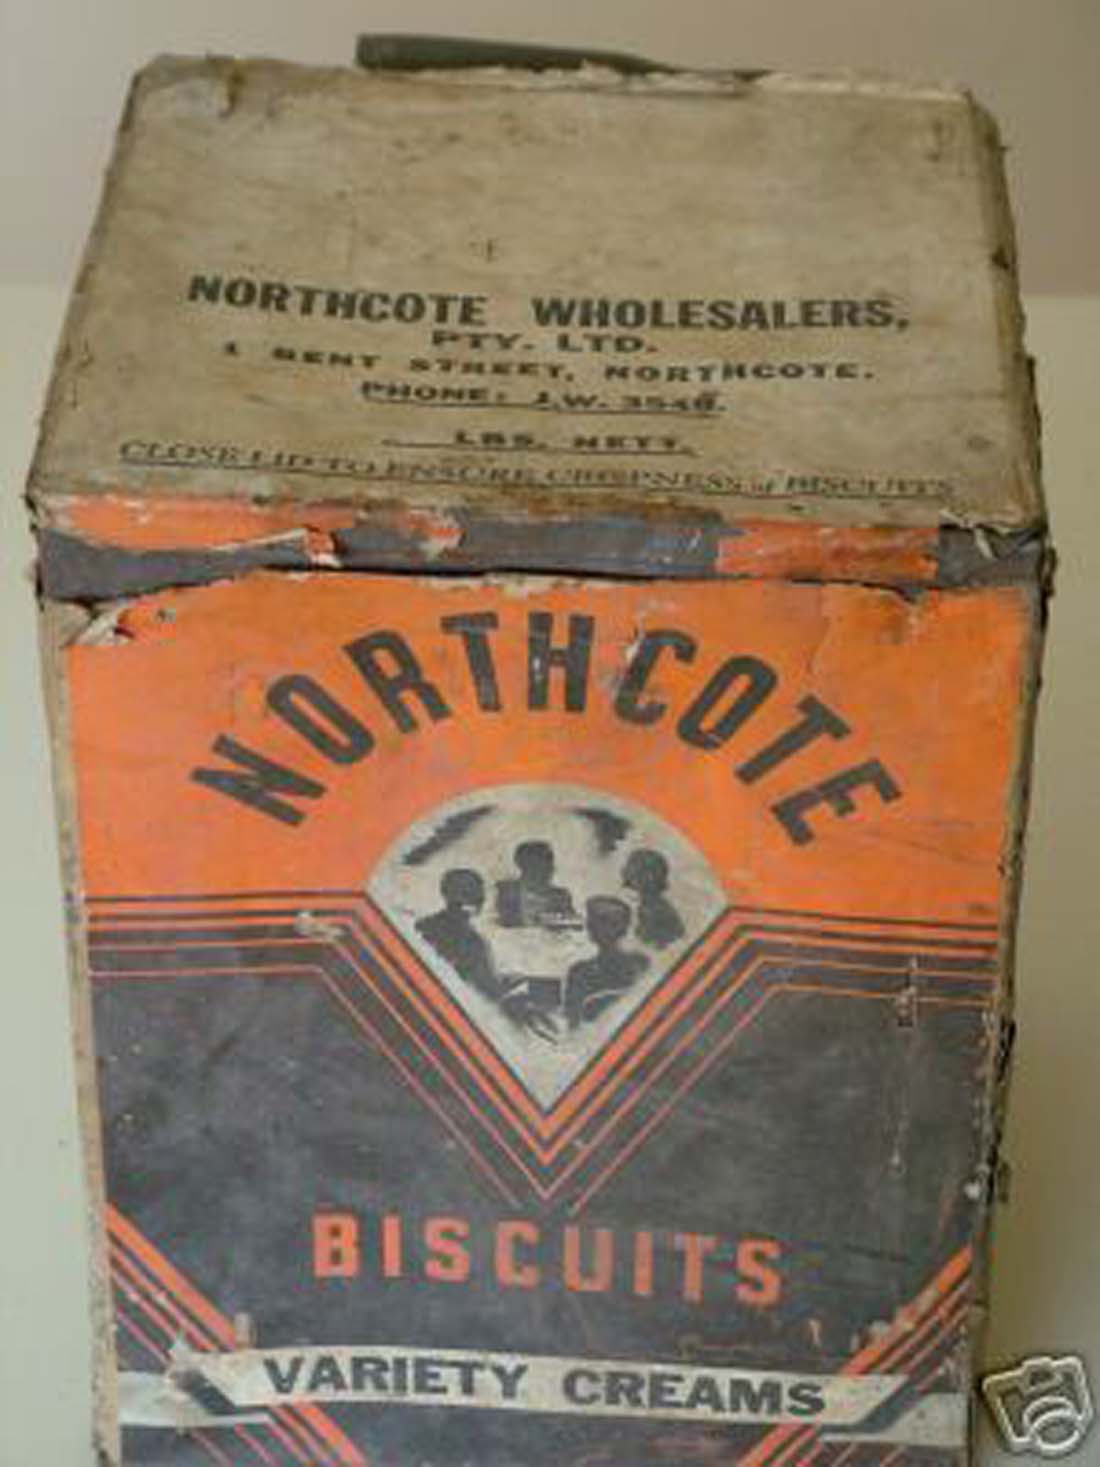 Image of Northcote Biscuits tin circa 1940s